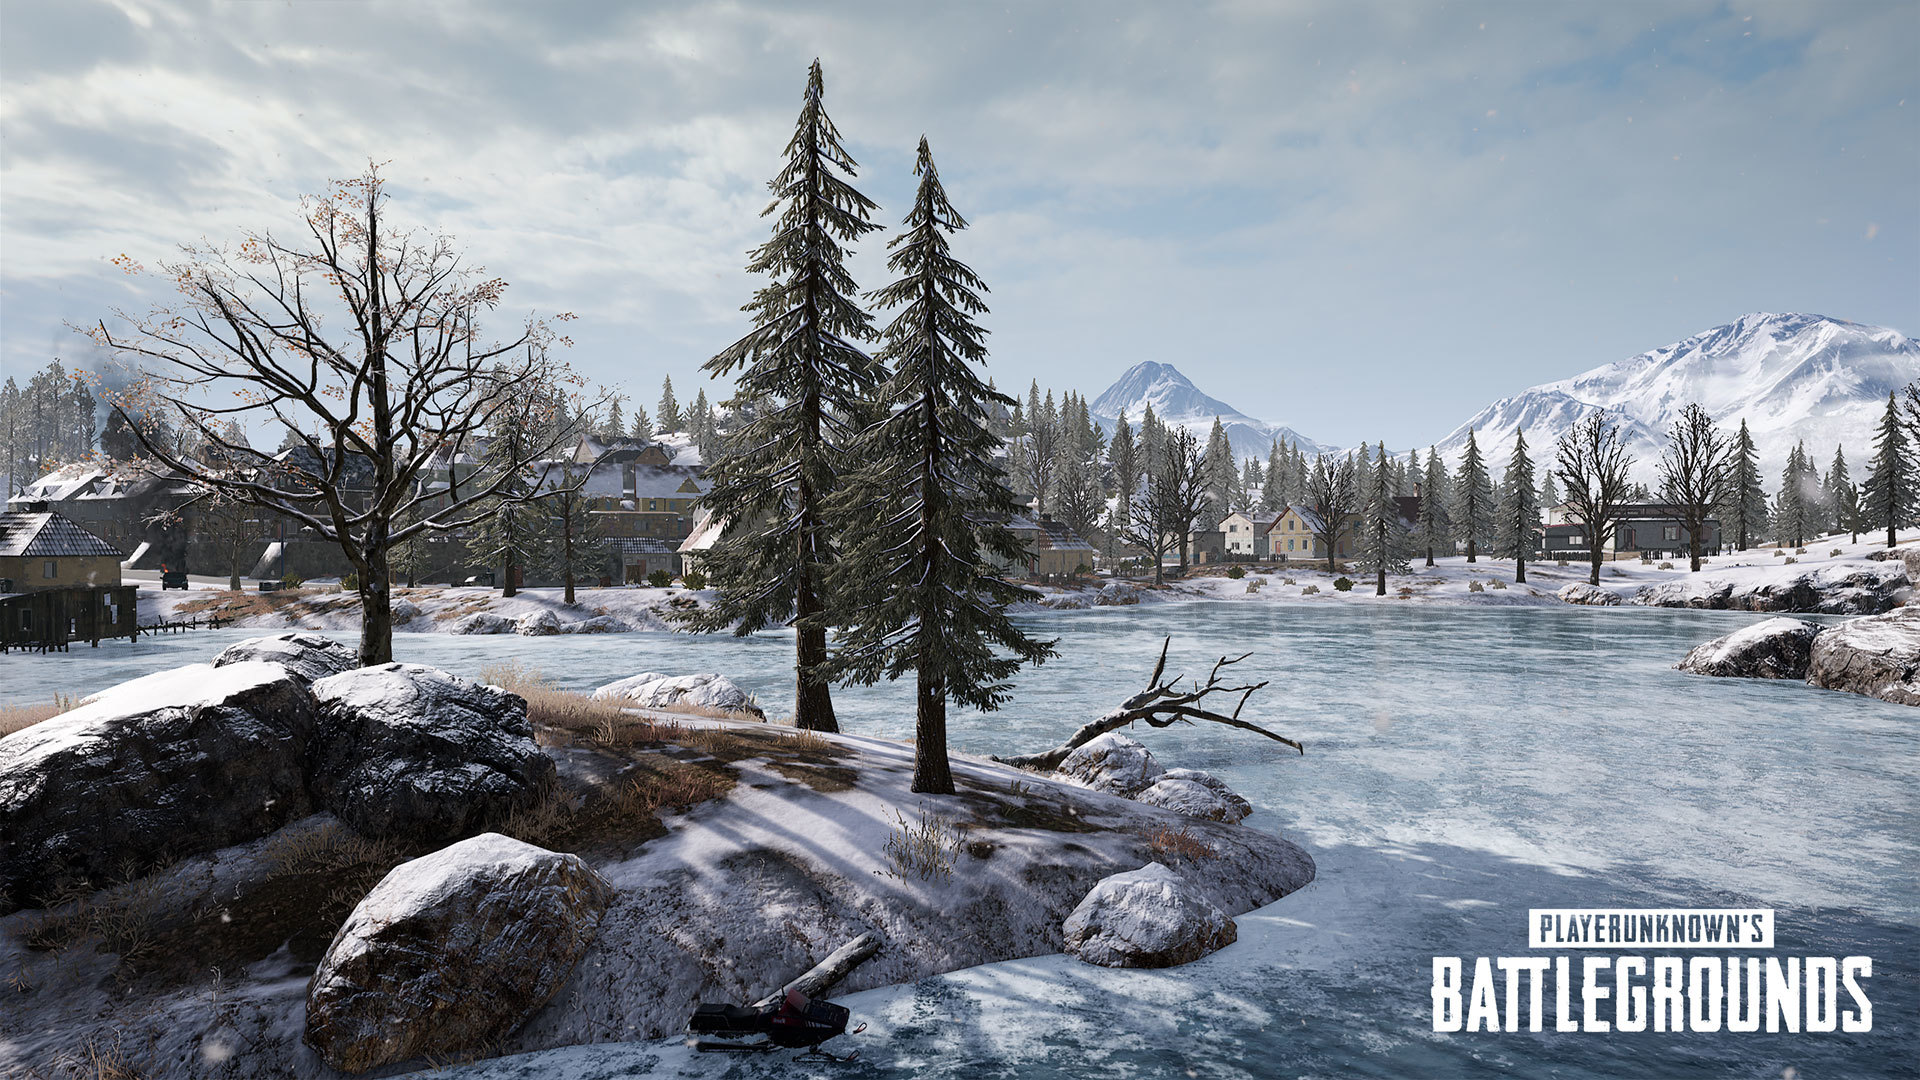 PlayerUnknown’s Battlegrounds – Vikendi Map Arrives for Consoles on